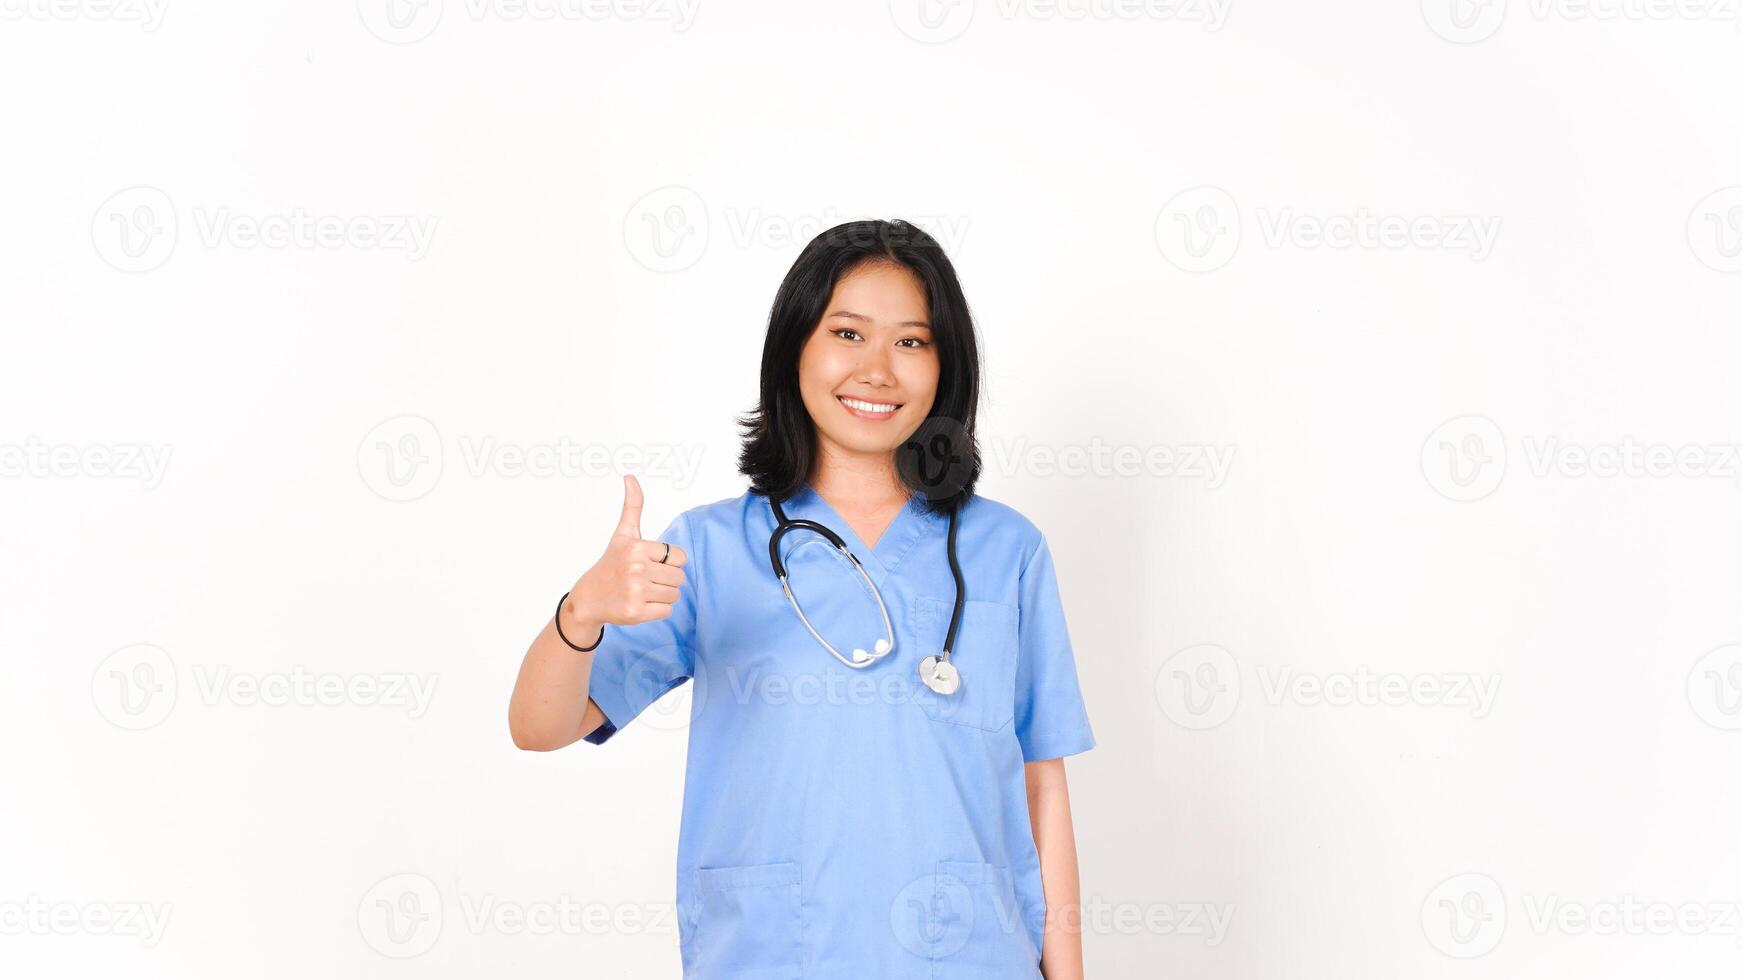 Young Asian female doctor showing thumbs up isolated on white background photo